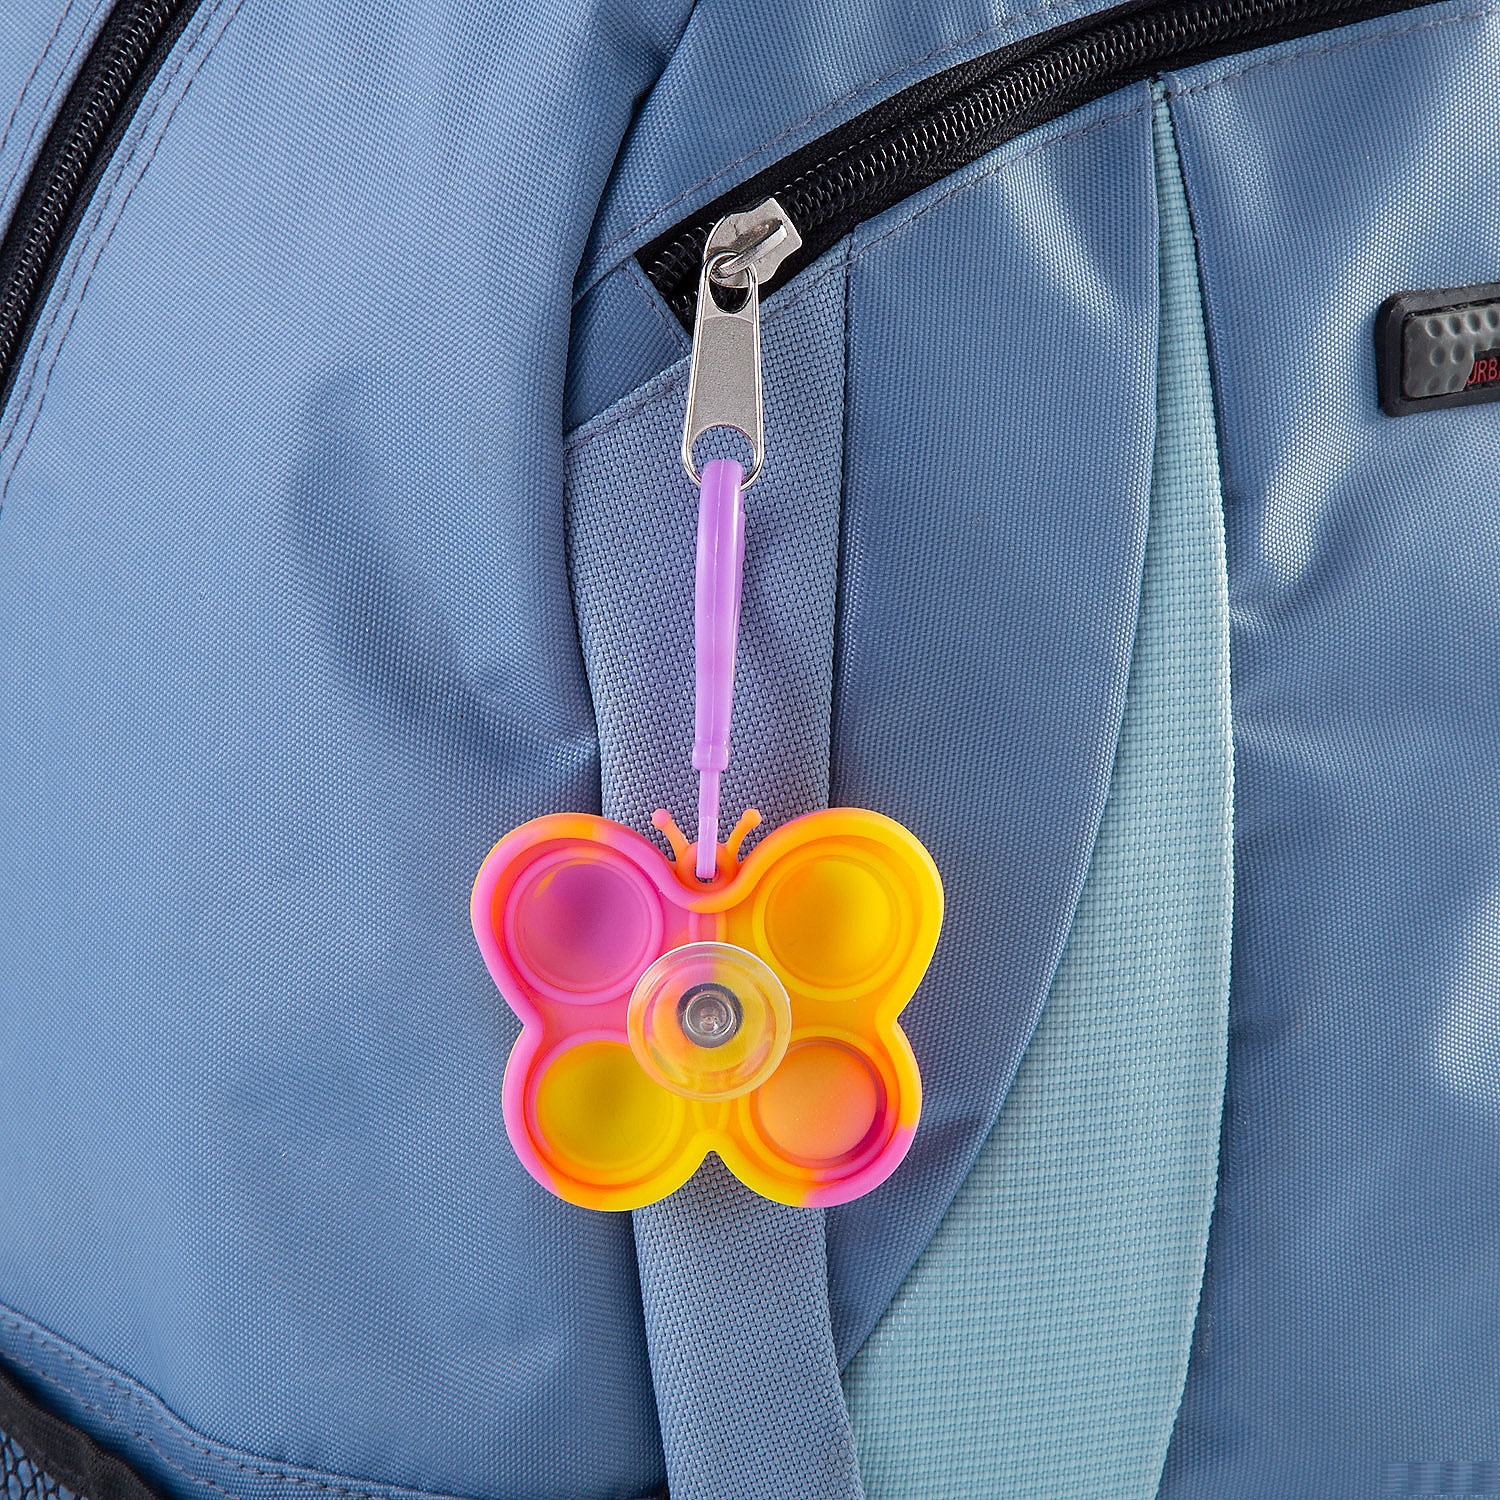 lotsa-pops-popping-toy-butterfly-spin-backpack-clip-keychains-12-pc-_14204472-a01